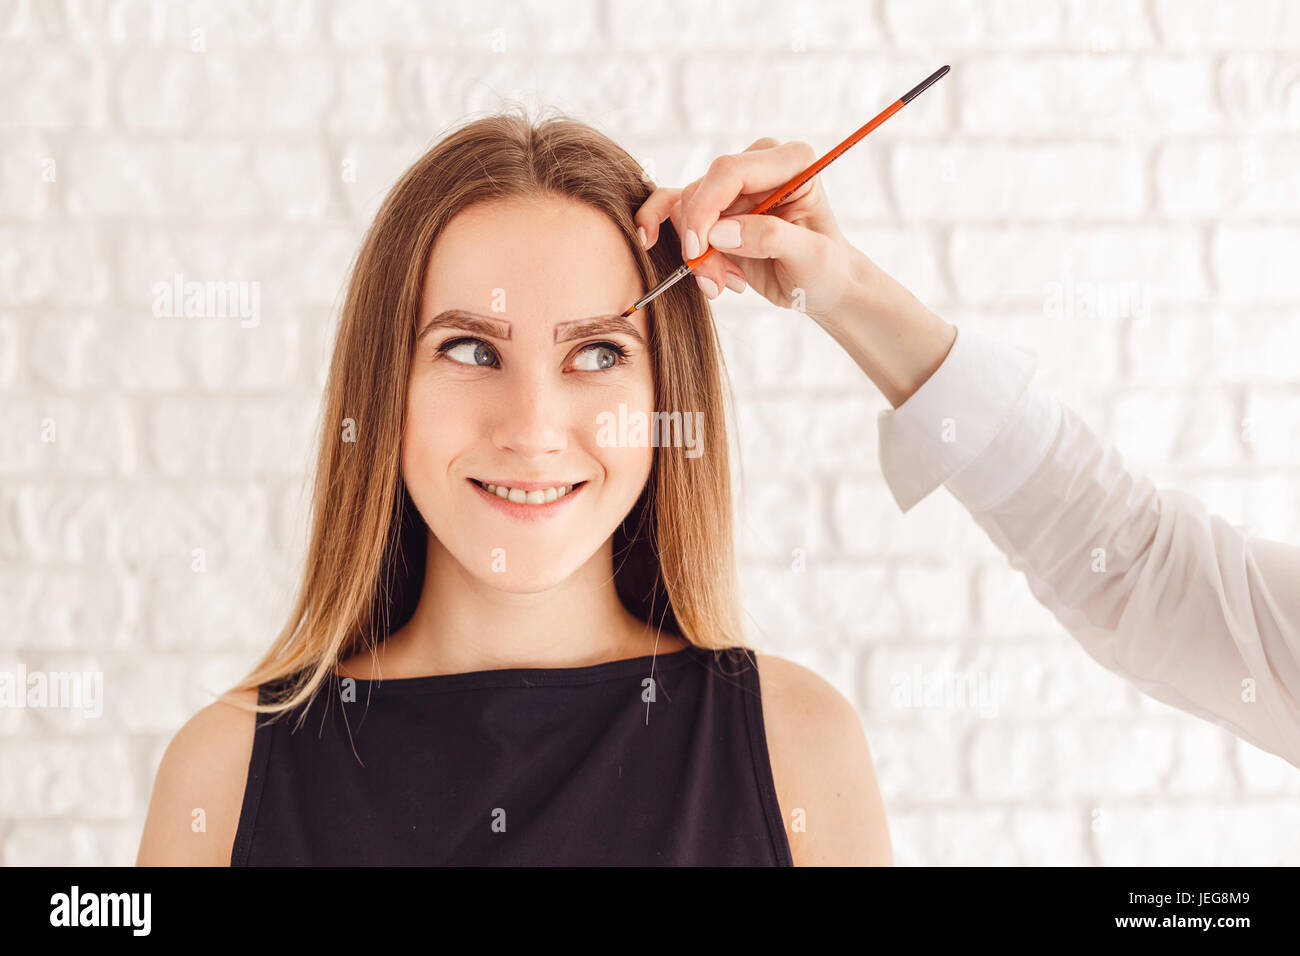 Eyebrow correction procedure for the smiling model with long eyelashes Stock Photo